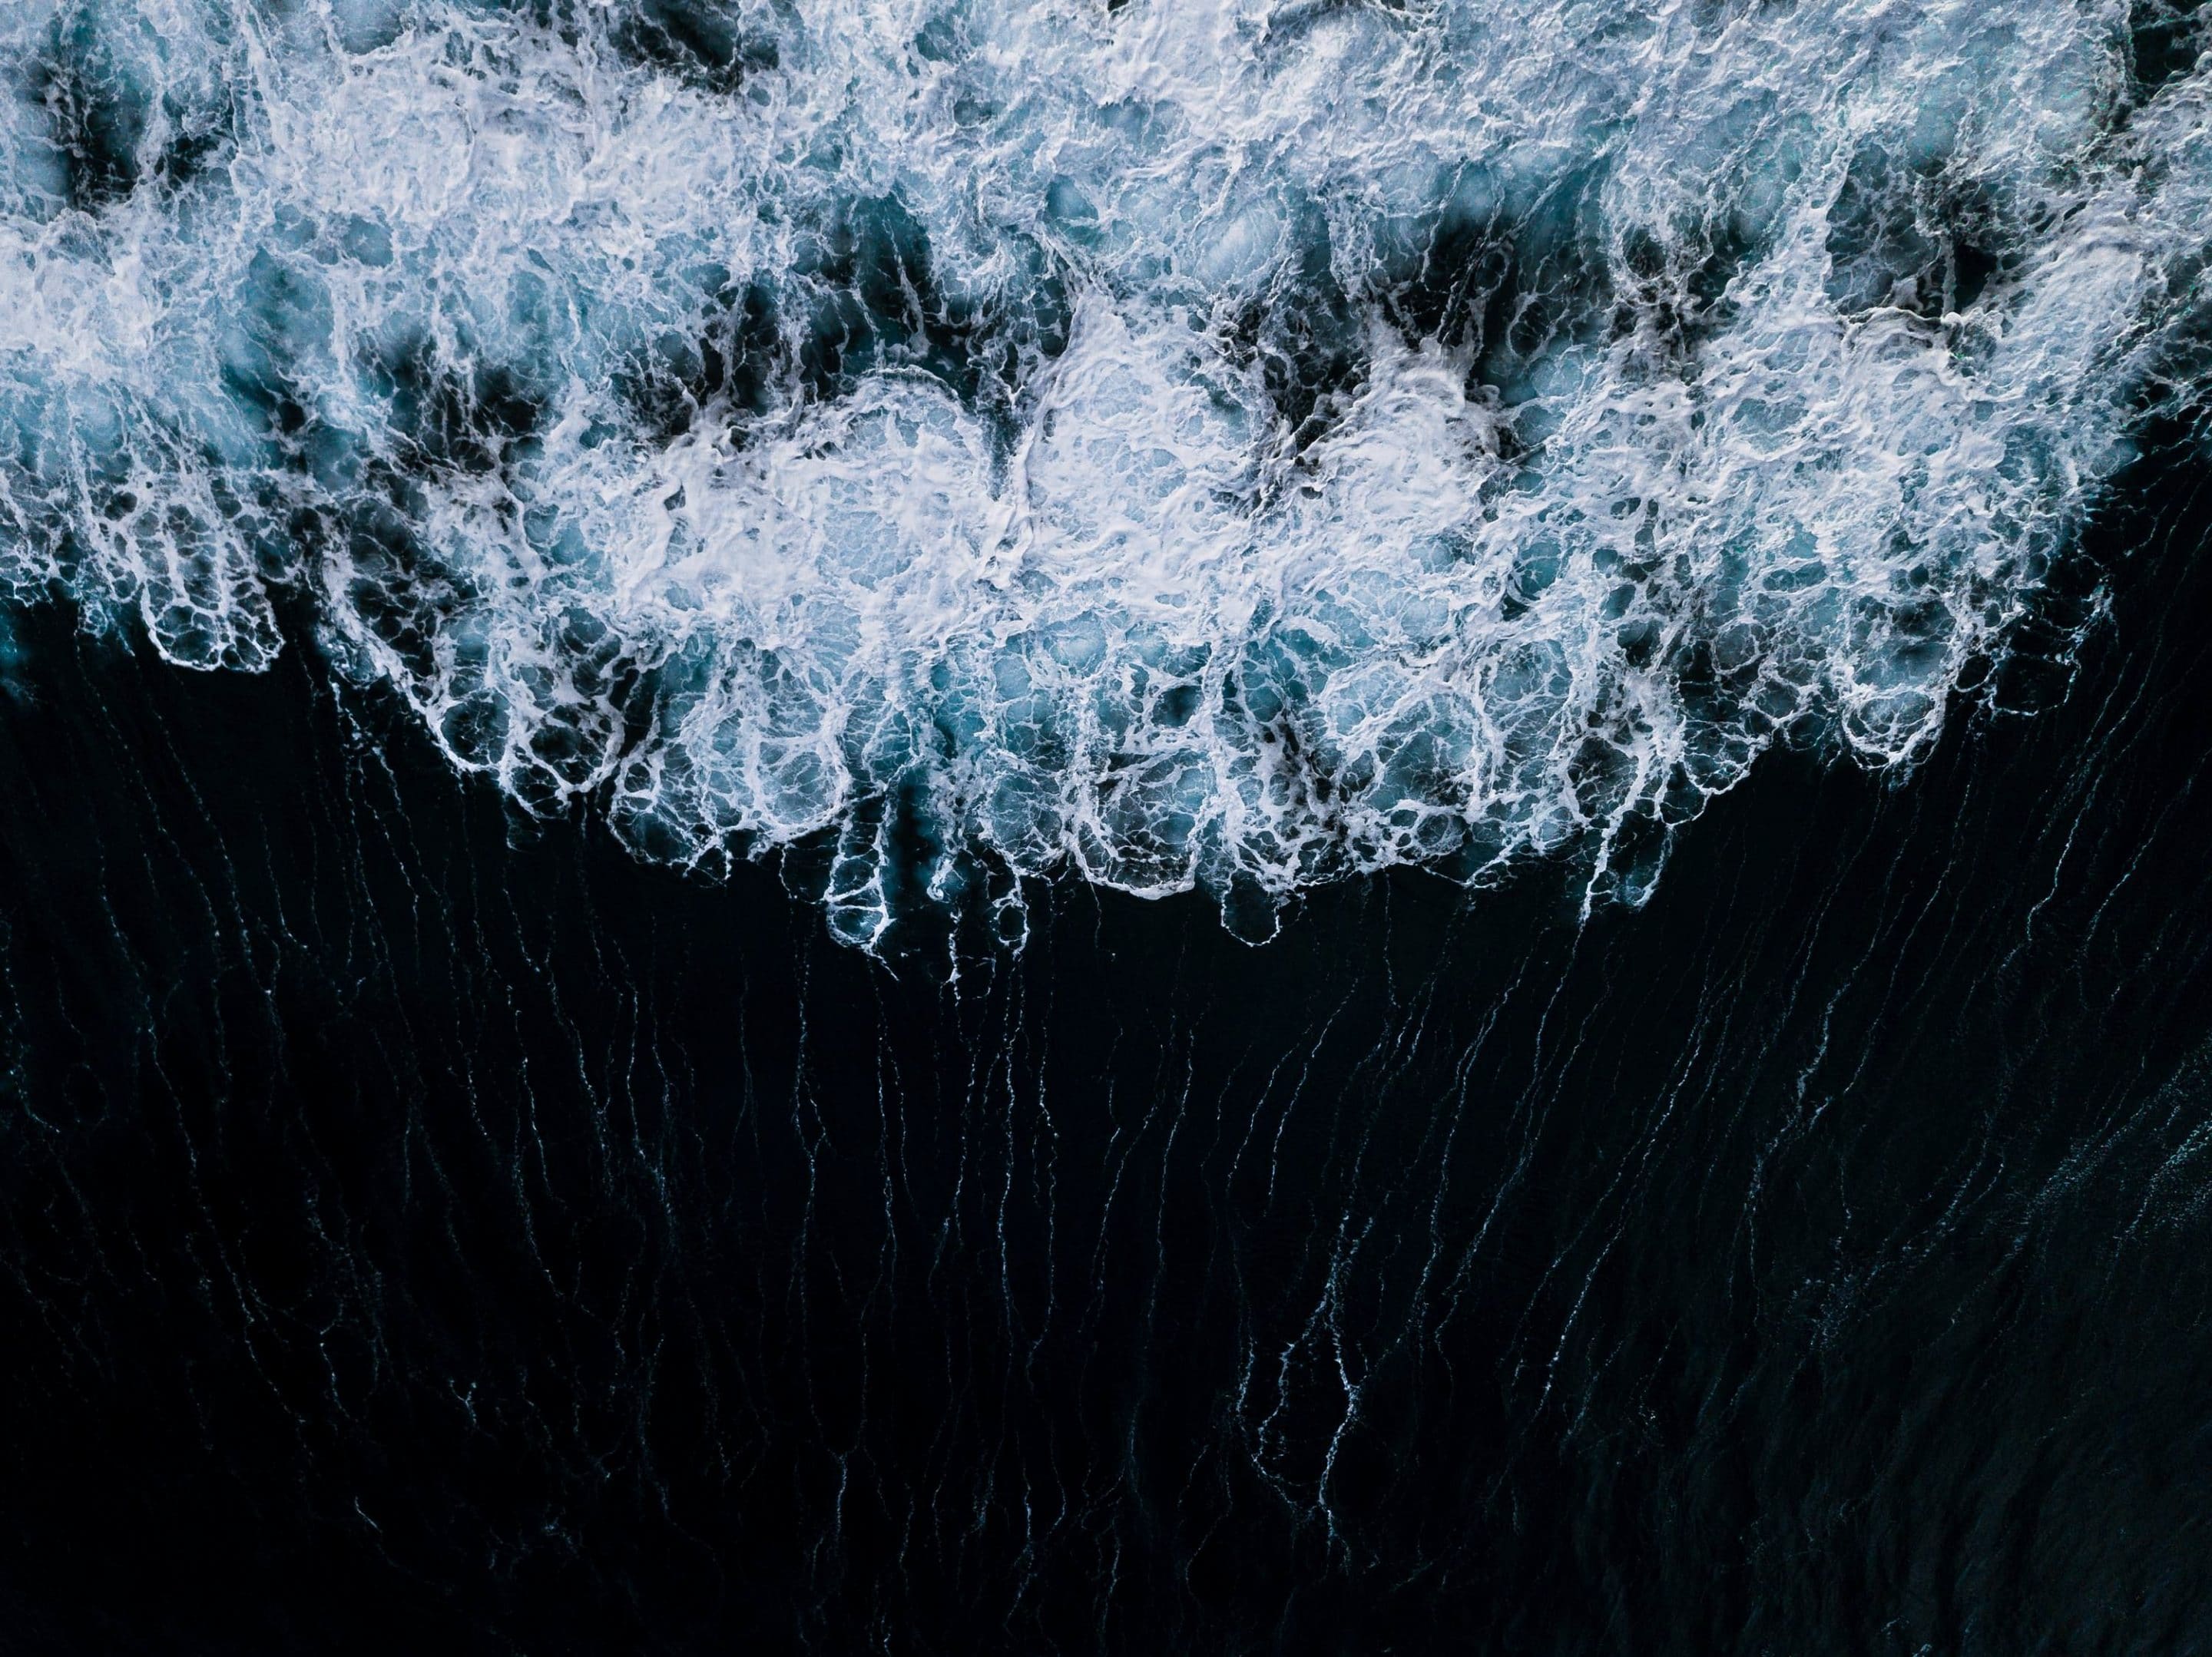 Flow shows different states of water be it solid, flowing or as a cloud. Captured in the wild Icelandic landscape often with a drone by photographer Michael Schauer